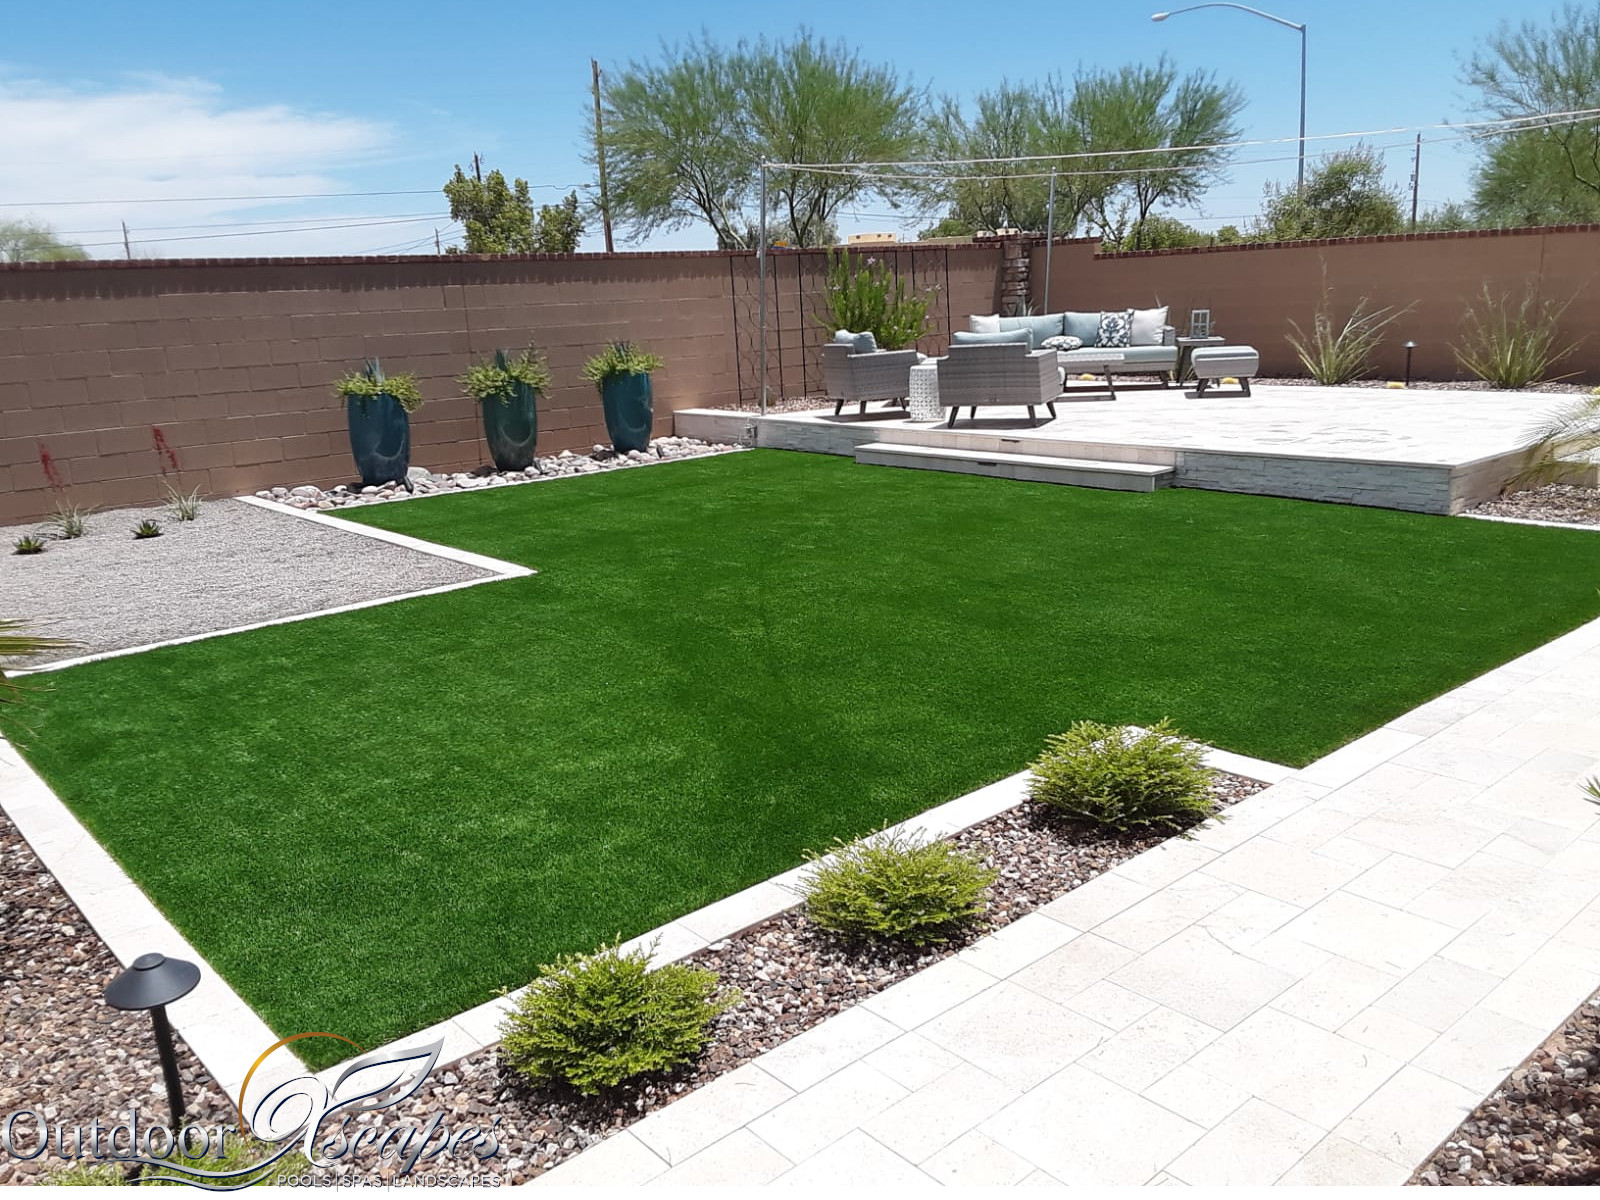 Outdoor Living Spaces00008